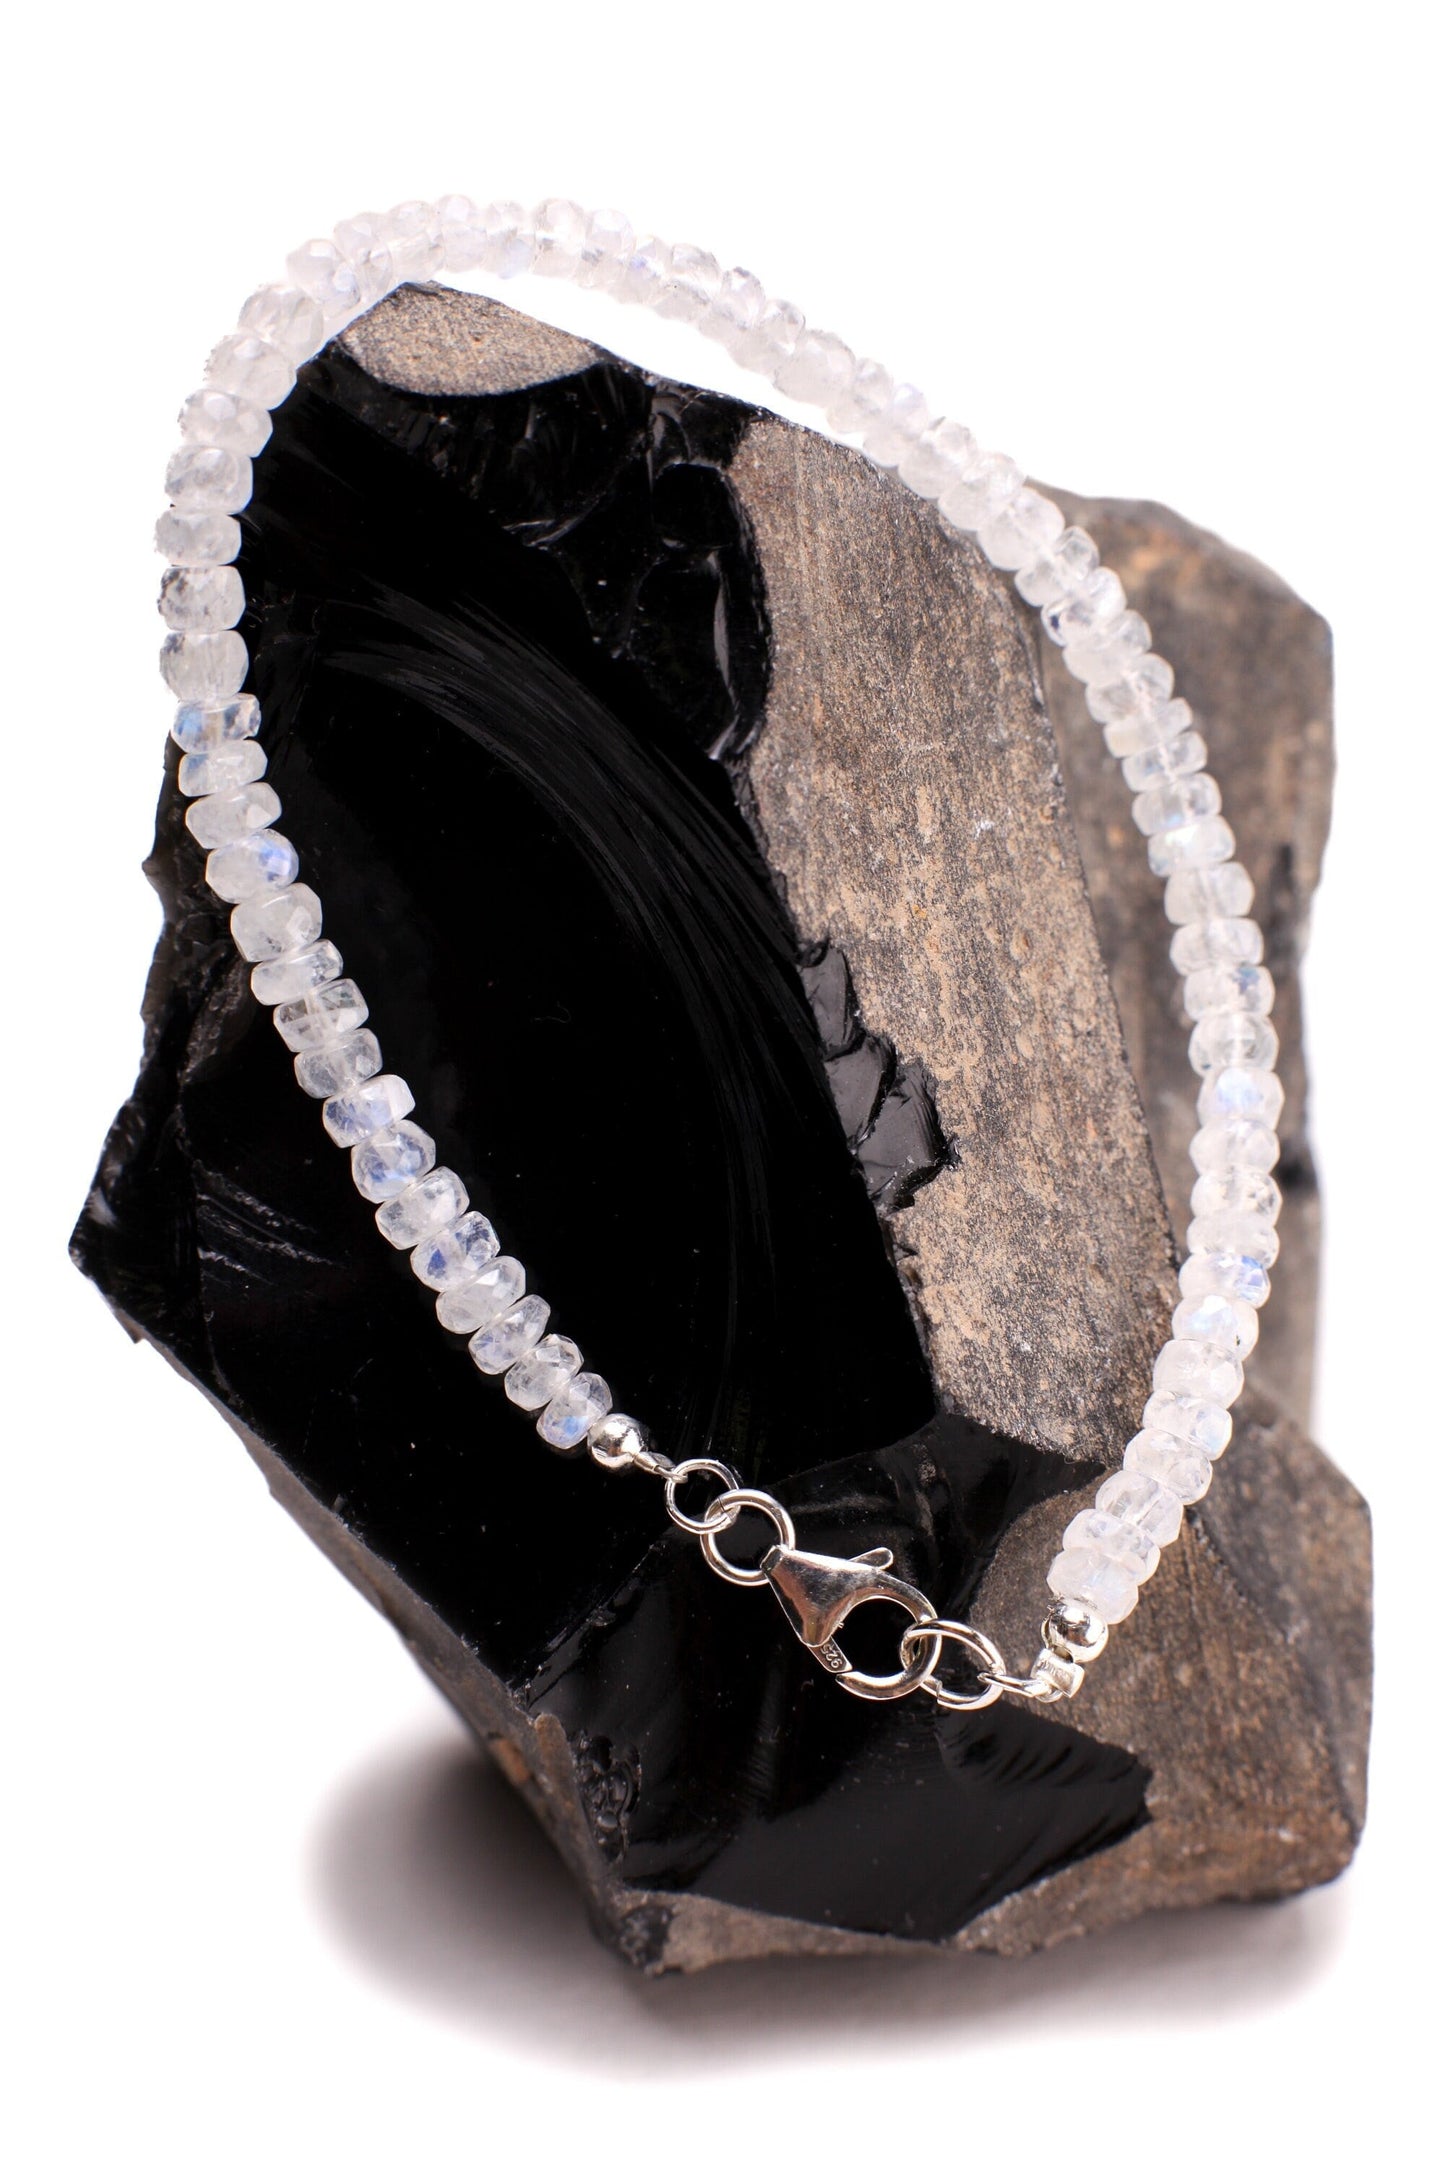 Moonstone Faceted Rondelle 4-5mm Bracelet in 925 Sterling Silver or 14K Gold Filled Clasp, Natural Precious gift for her.